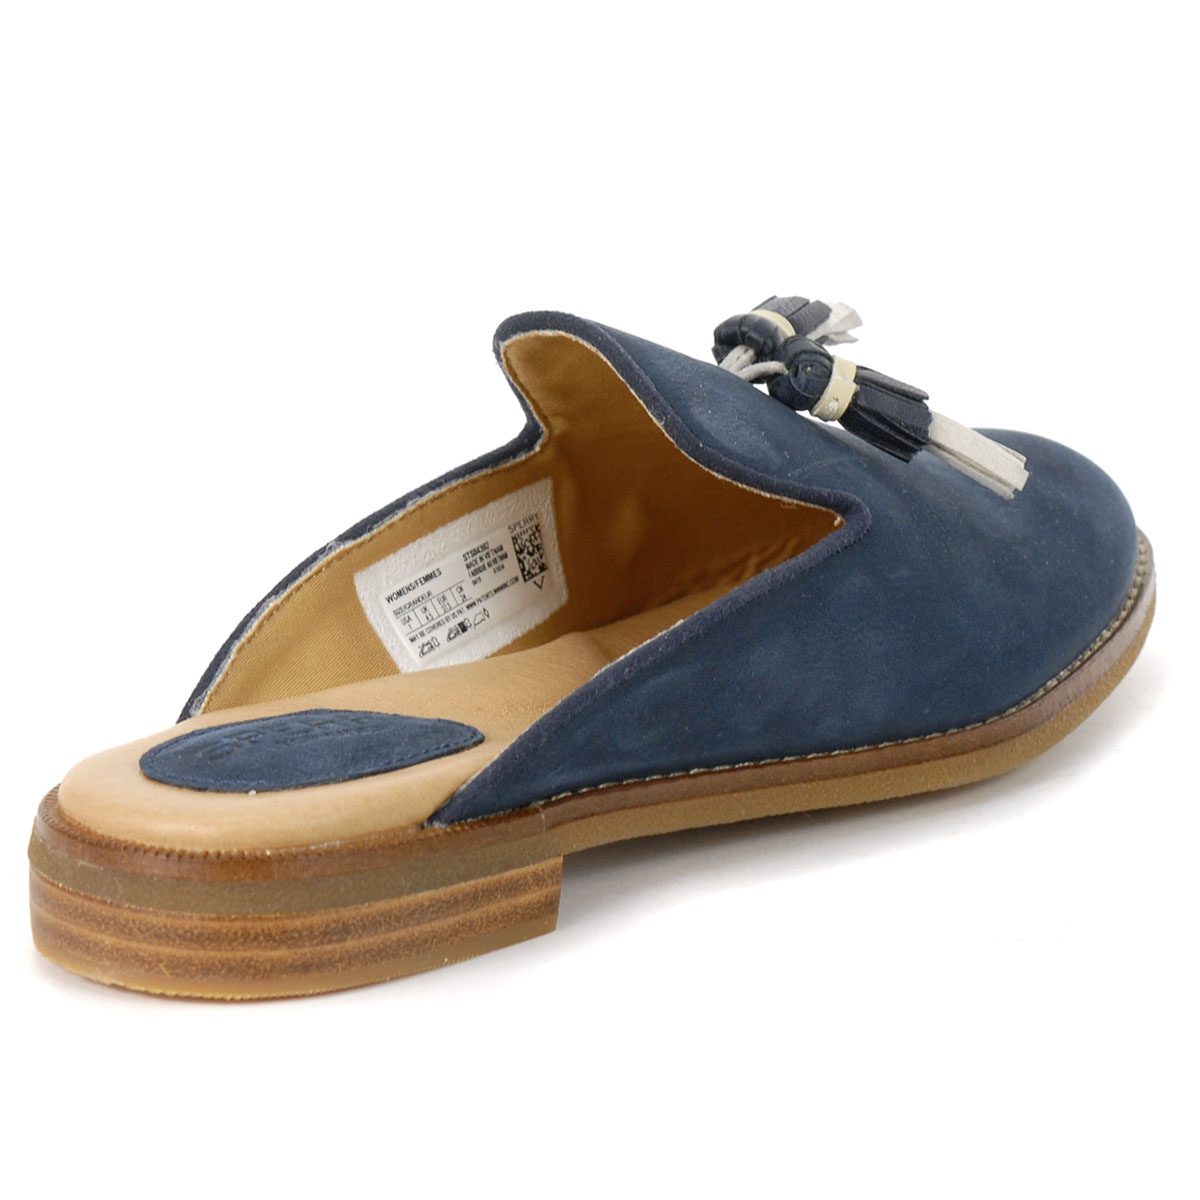 Sperry Top-Sider Women's Seaport Levy Tassel Navy Mule Shoes STS84392 ...